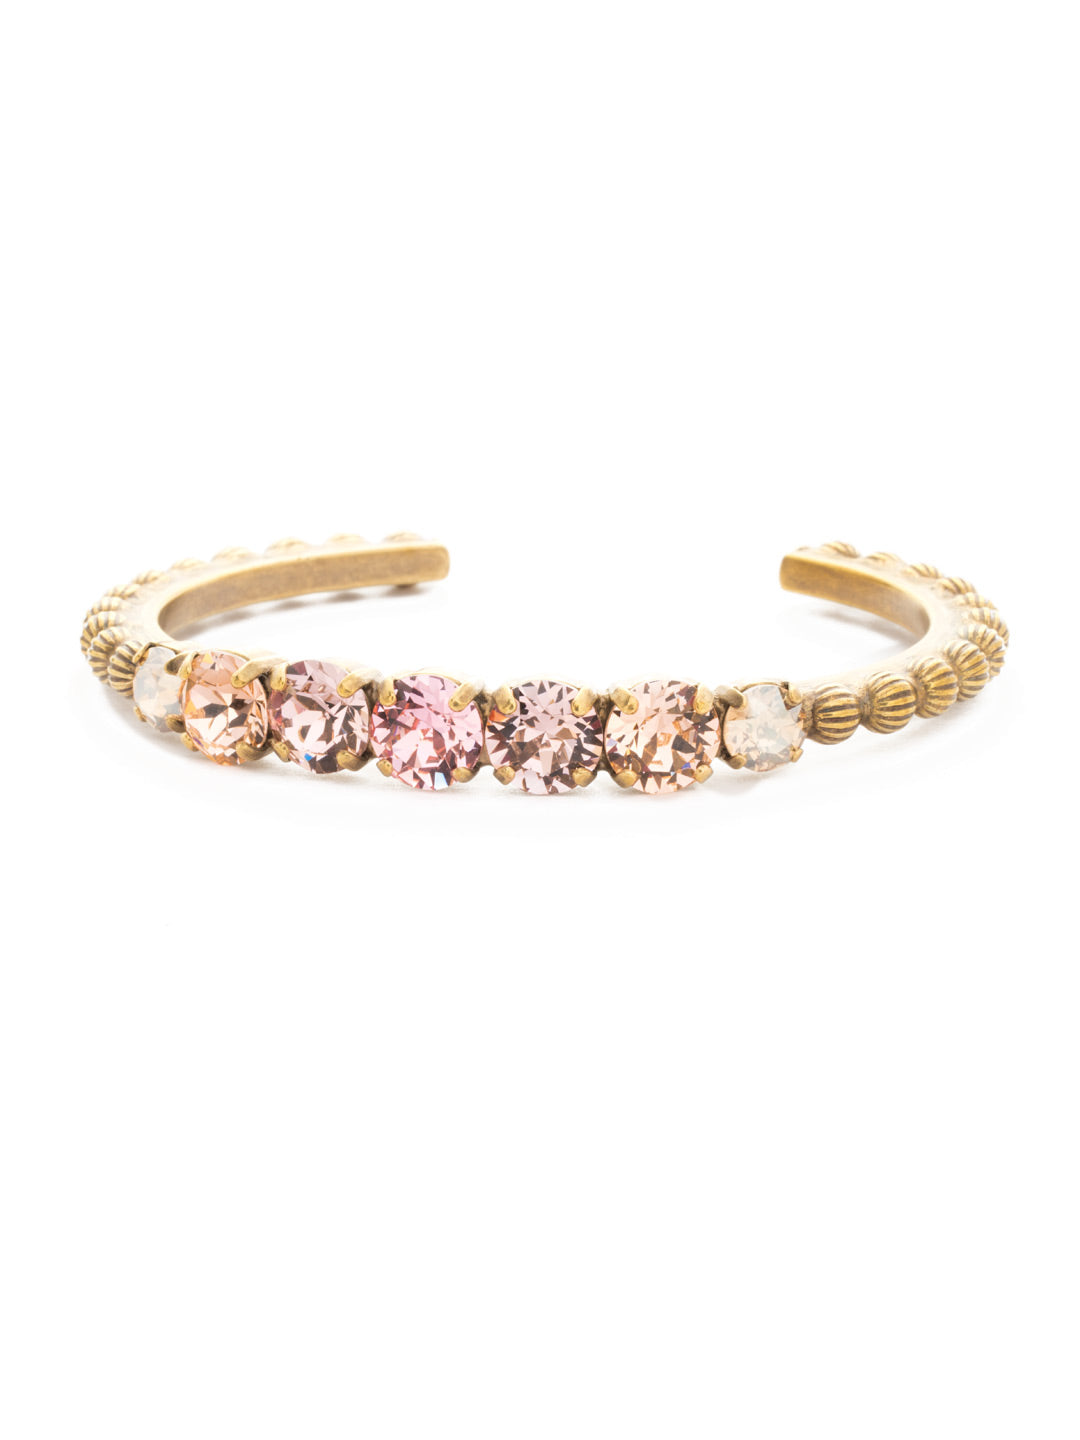 Mimosa Cuff Bracelet - BDQ24AGBCM - <p>A stylish cuff bracelet with far-away flare! Decorative ball chain accents this adjustable cuff featuring round and oval cut crystals. From Sorrelli's Beach Comber collection in our Antique Gold-tone finish.</p>